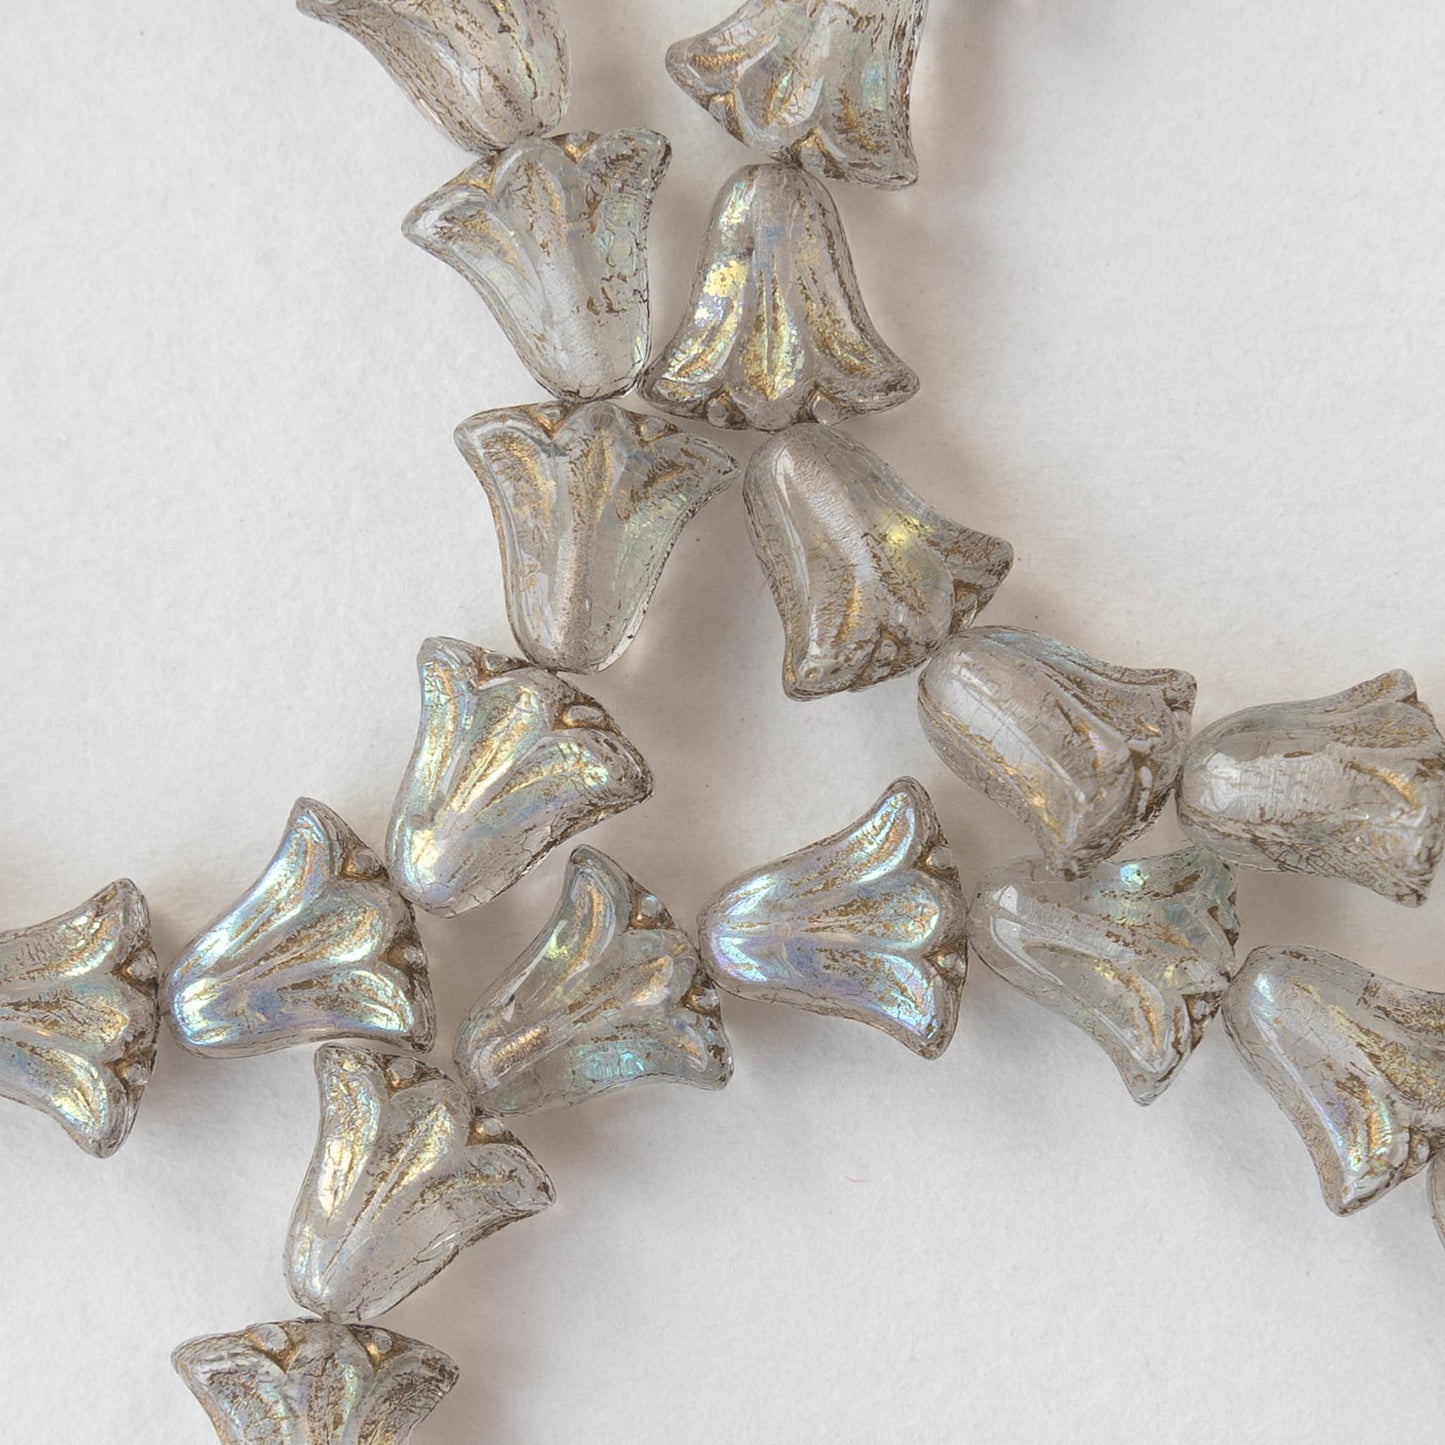 9mm Lily Flower Beads - Crystal AB with Gold Wash - 15 Beads